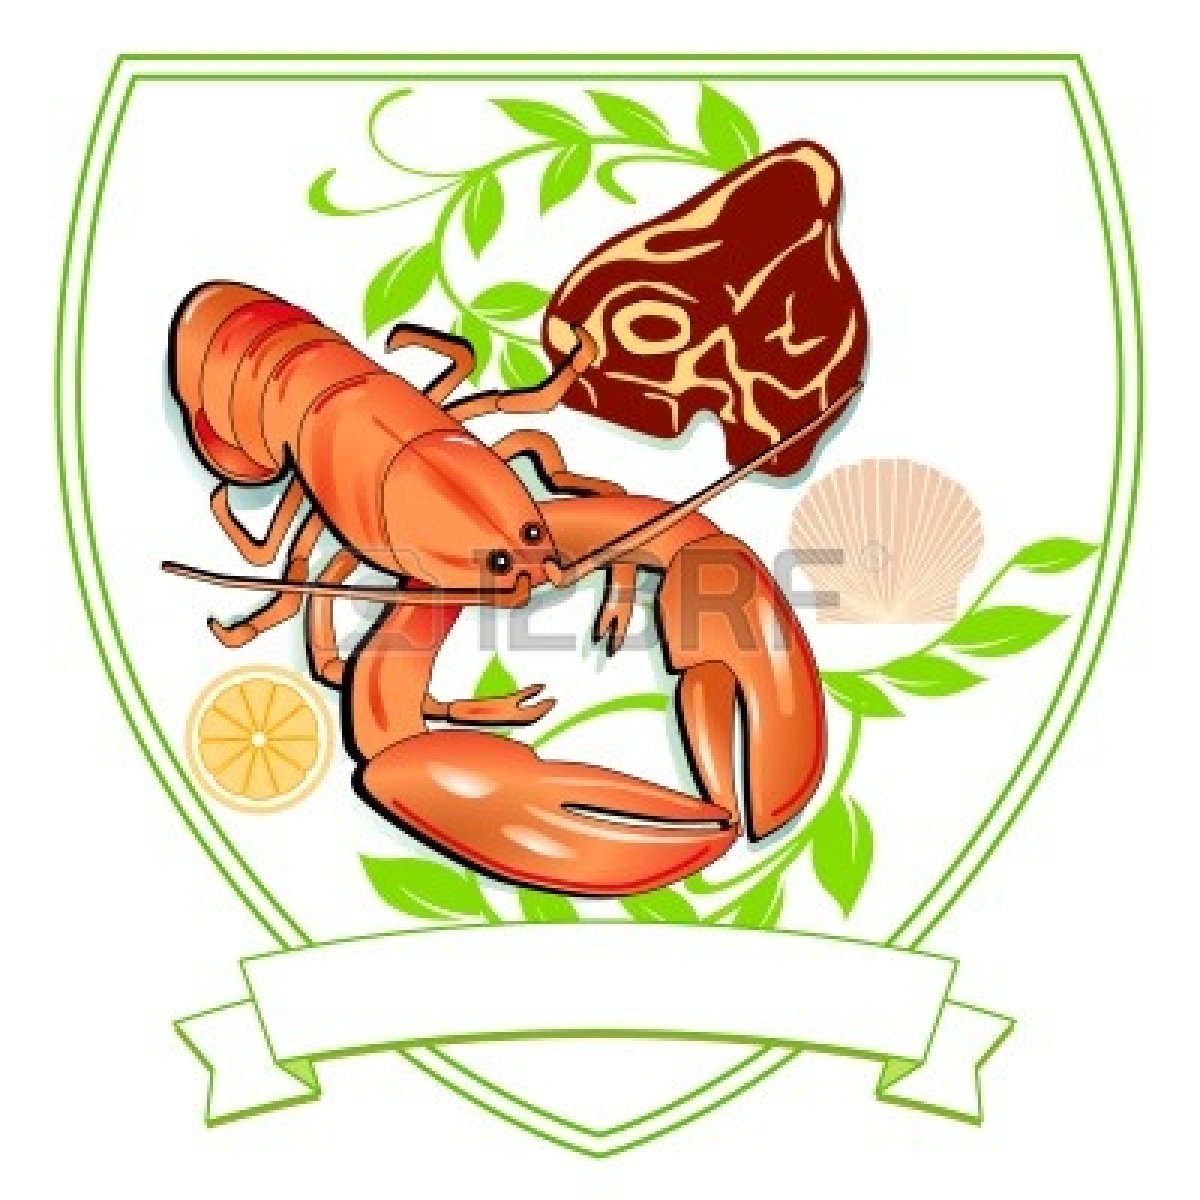 Lobster Dinner Clipart   Clipart Panda   Free Clipart Images